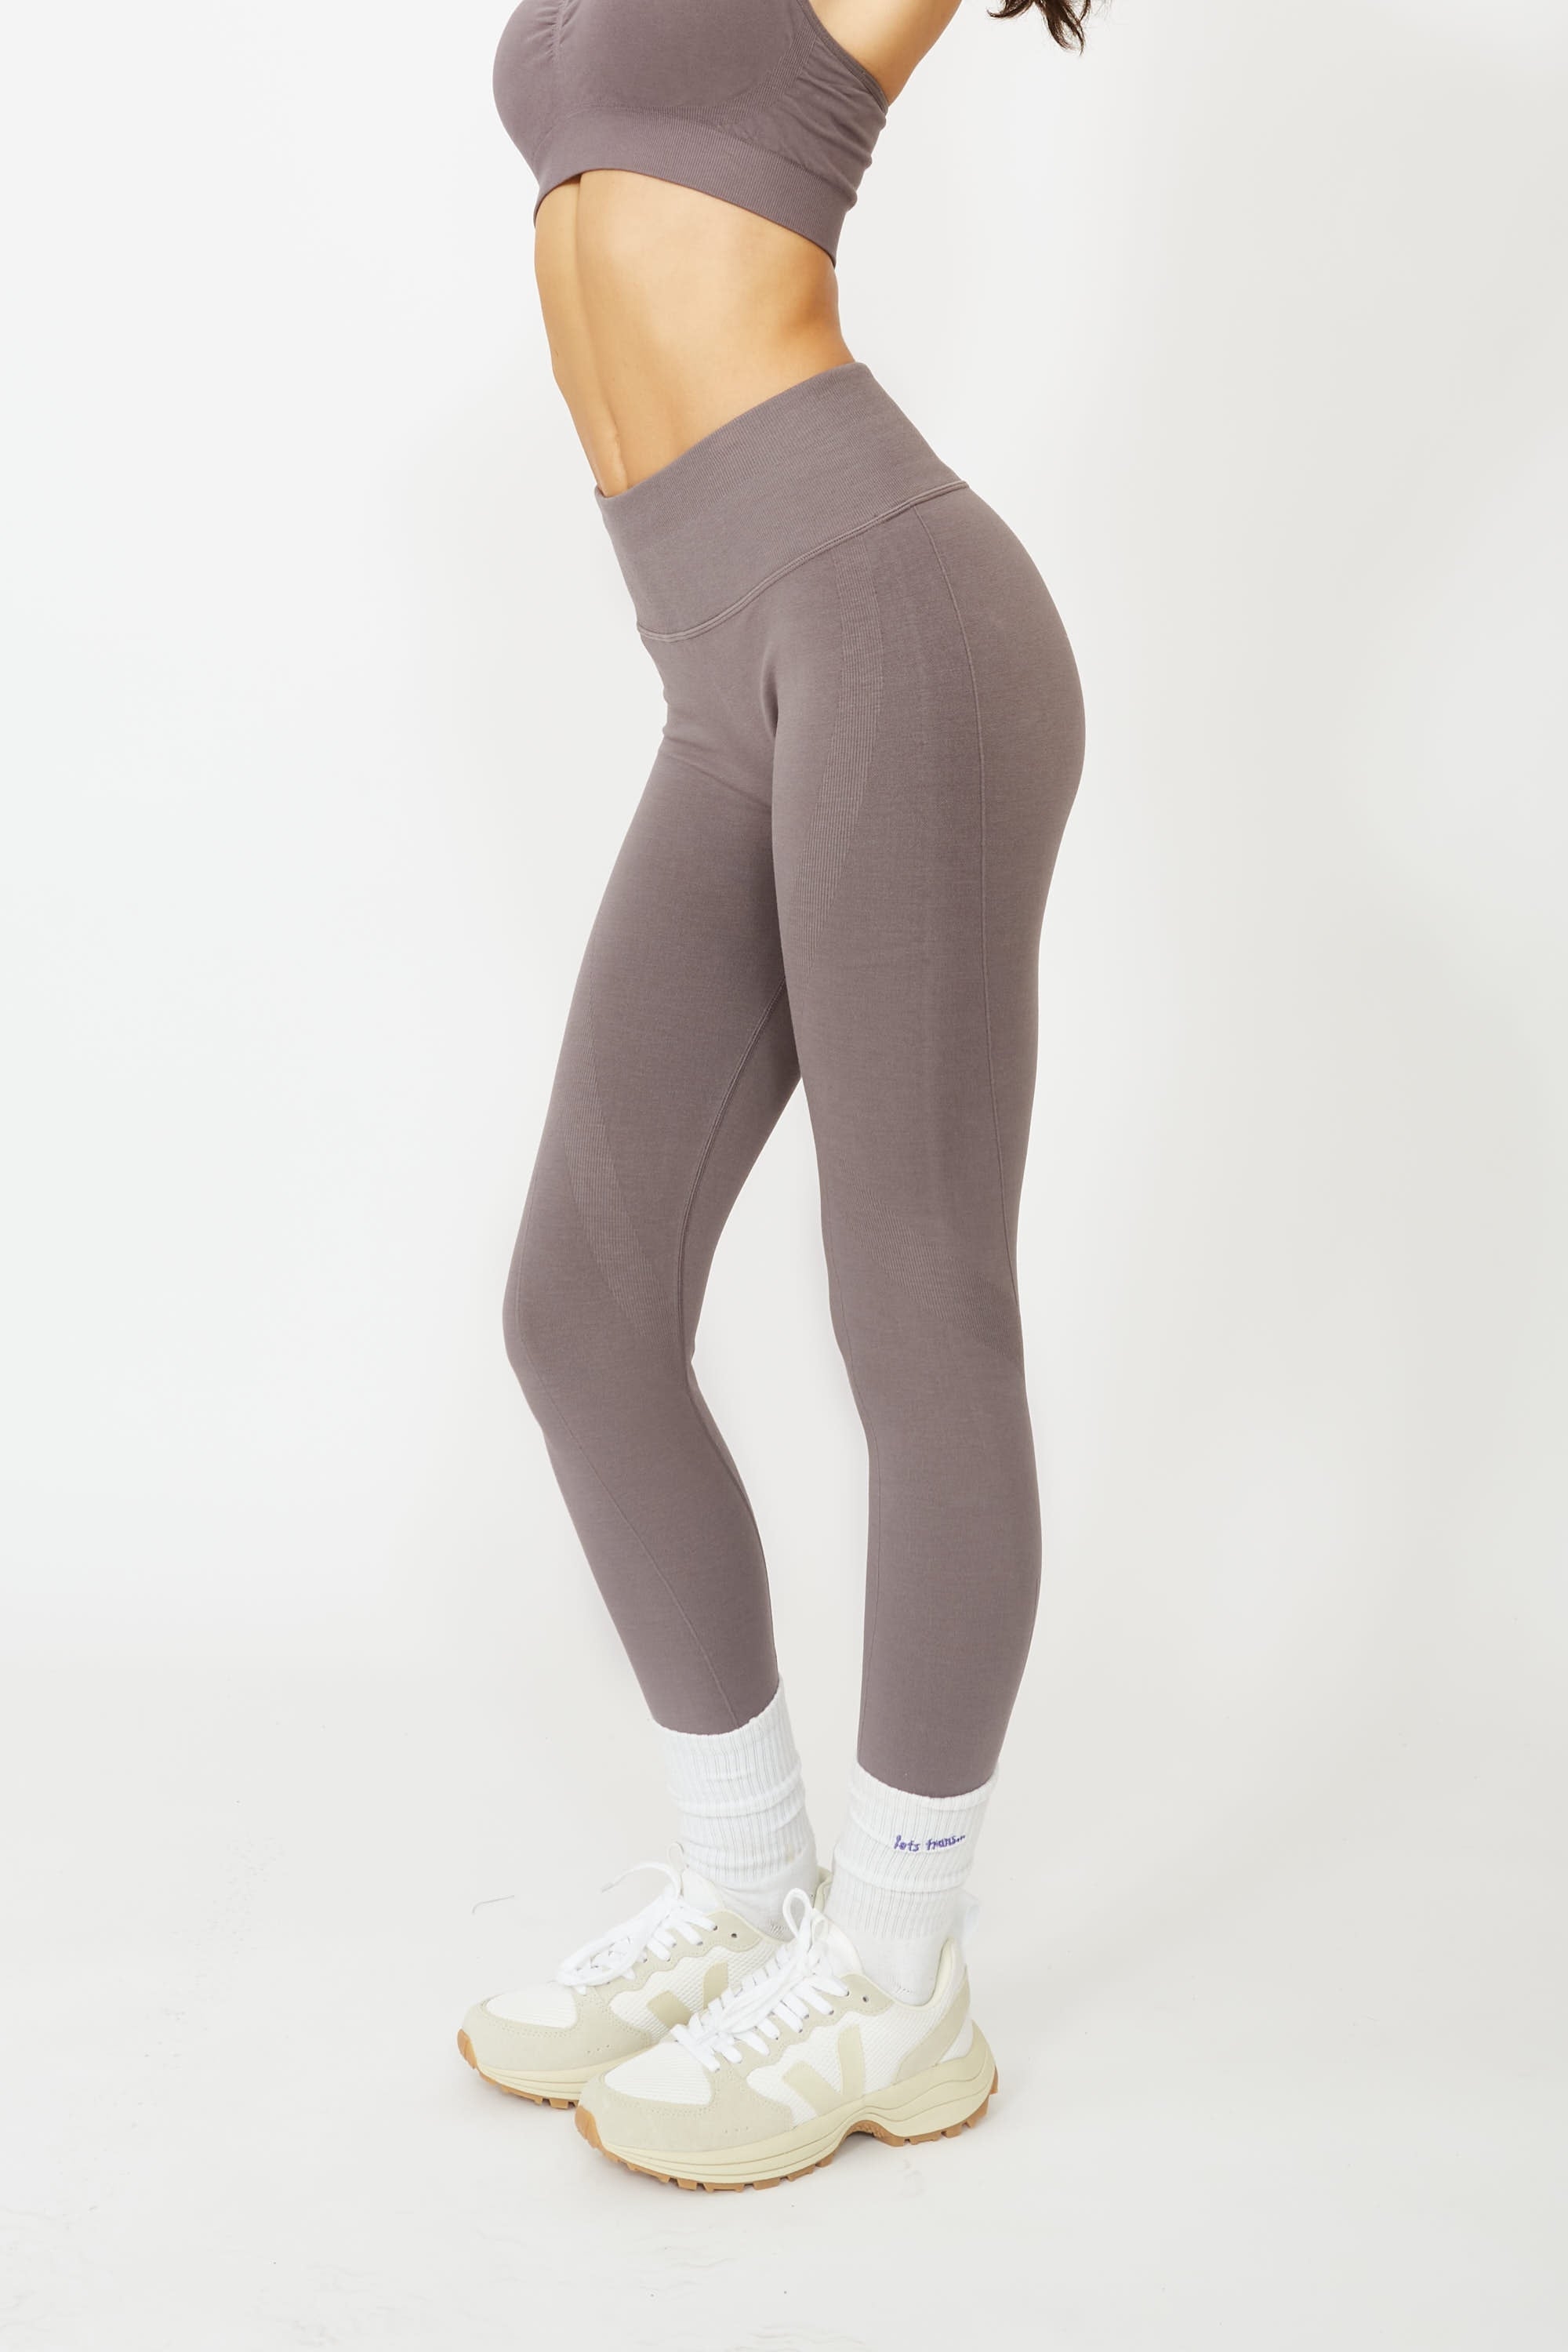 Model wearing grey leggings and supportive sports bra for sustainable activewear brand, Jilla.